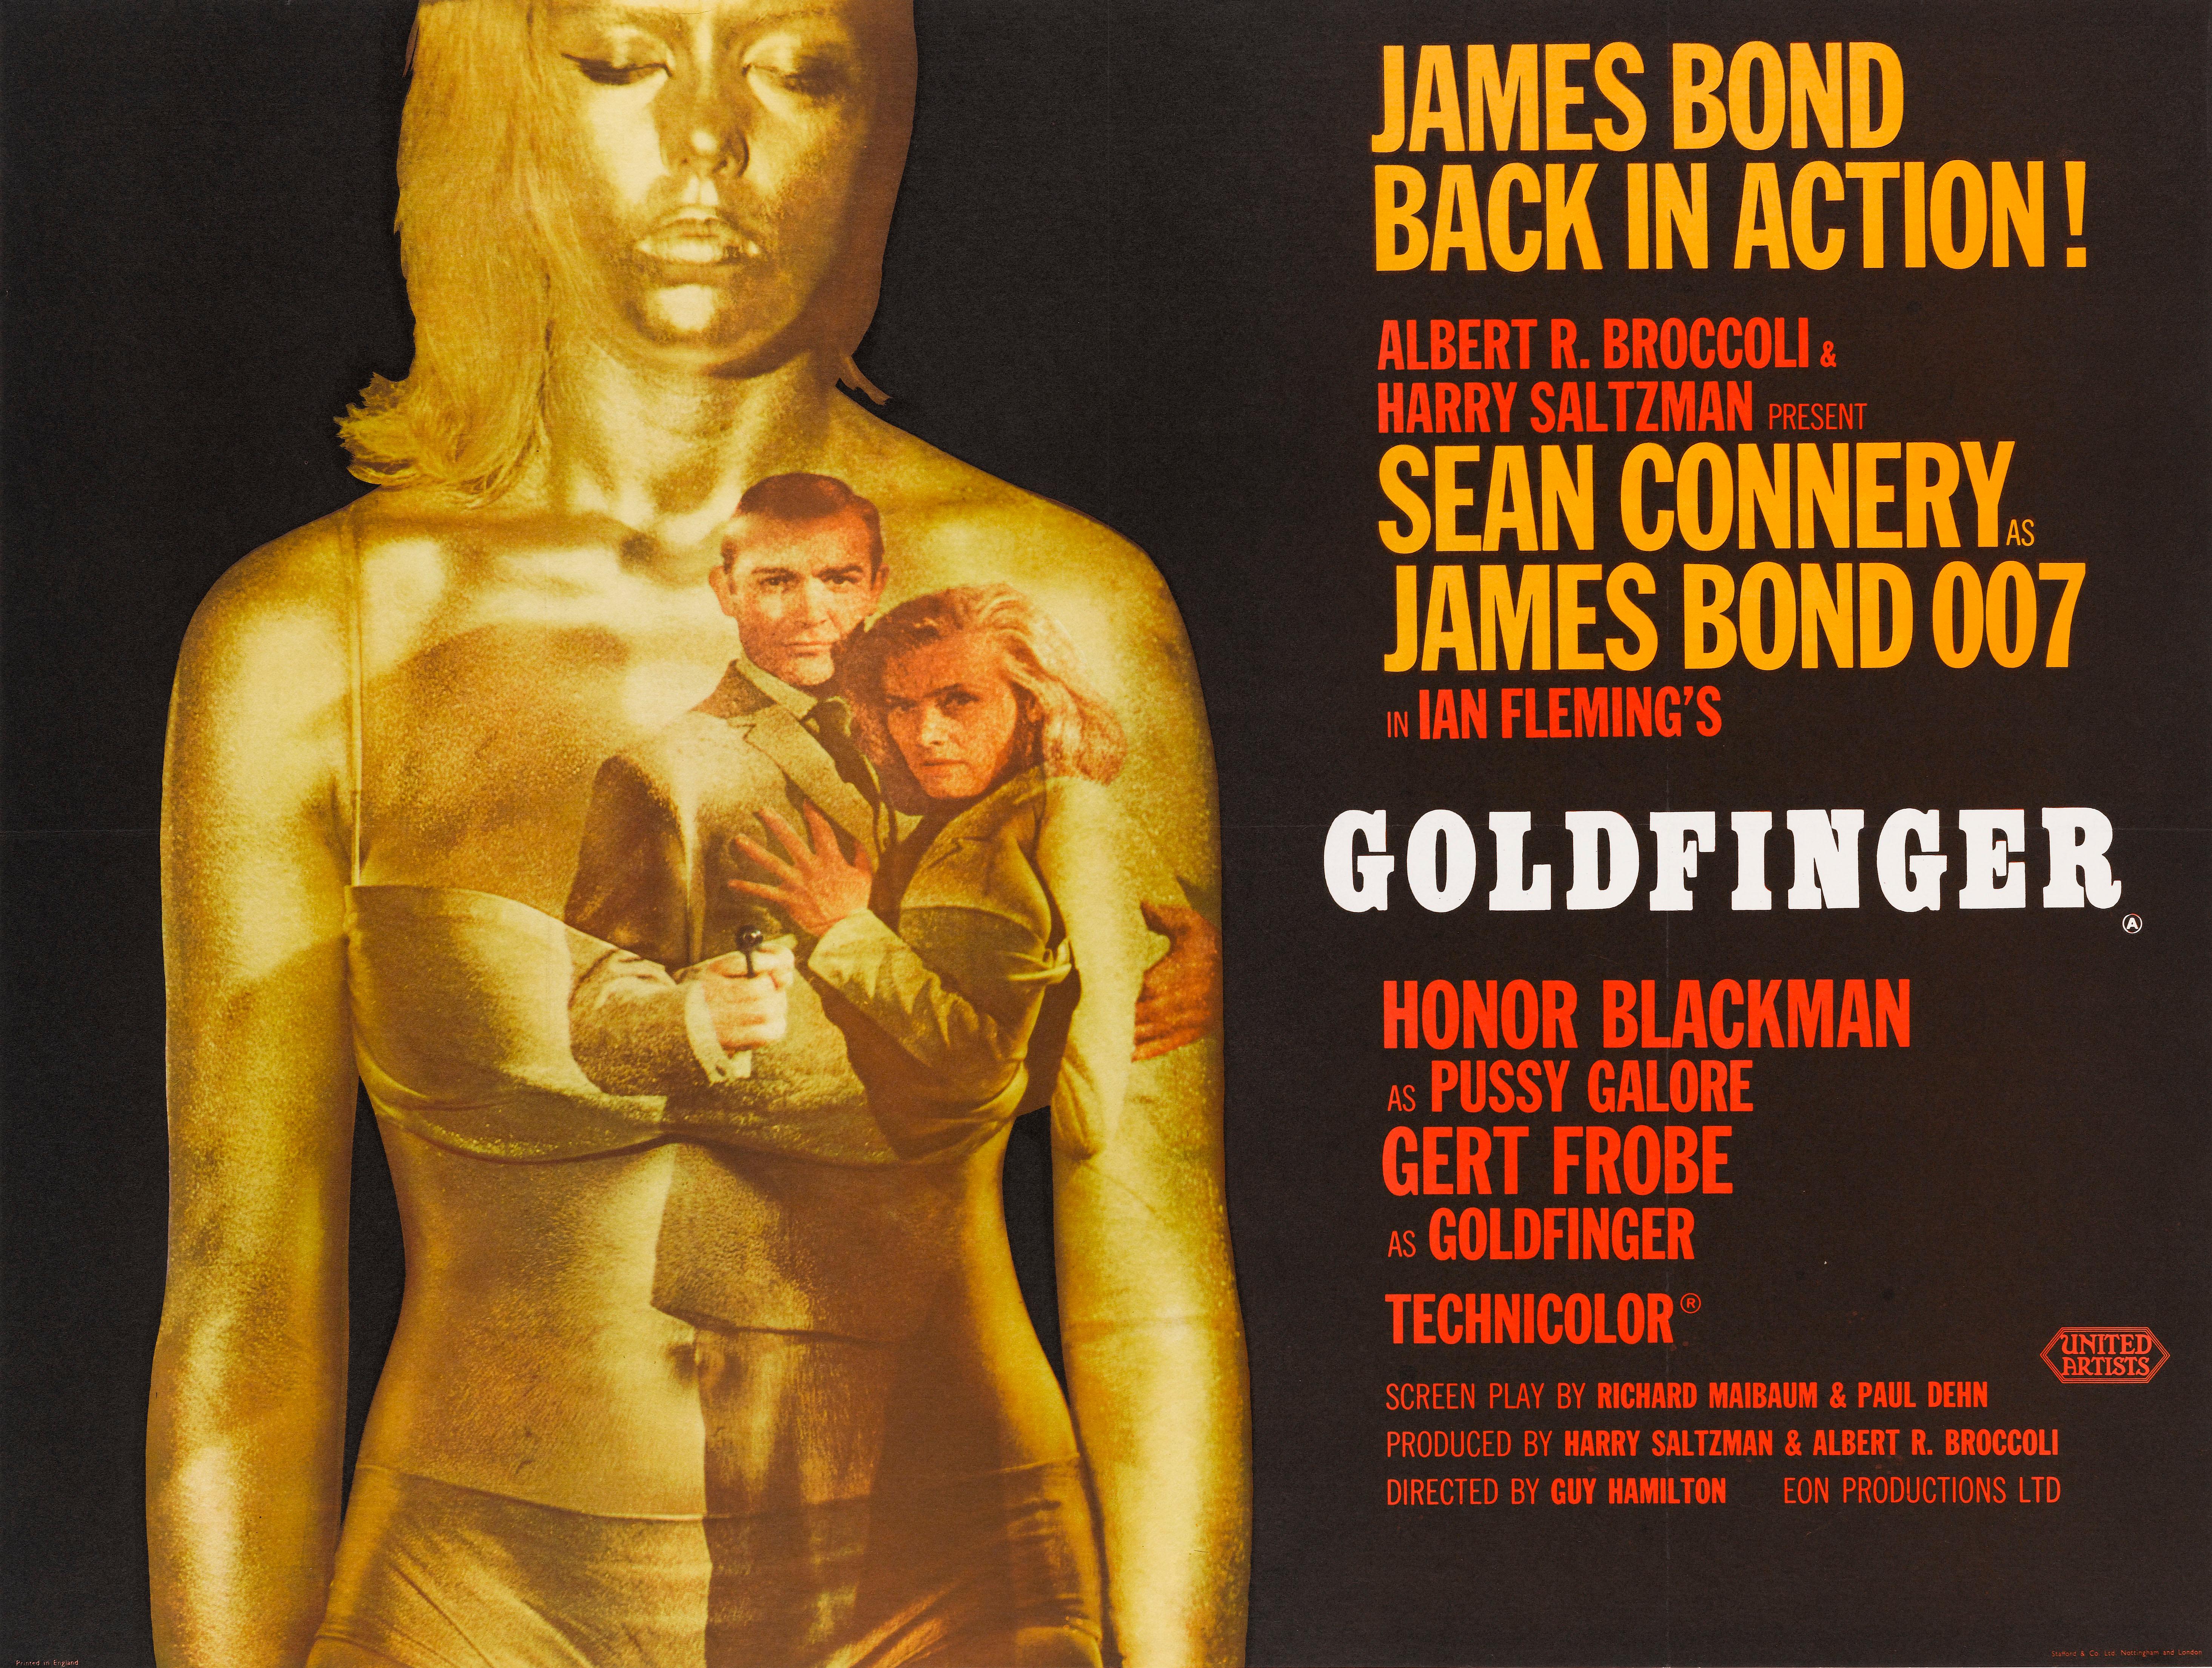 Original British film poster from (1964) 30 x 40 in. (76 x 102 cm)
This poster would have been used outside the cinema at the films original release.
Goldfinger was the third James Bond film and the third to star Sean Connery as the fictional MI6